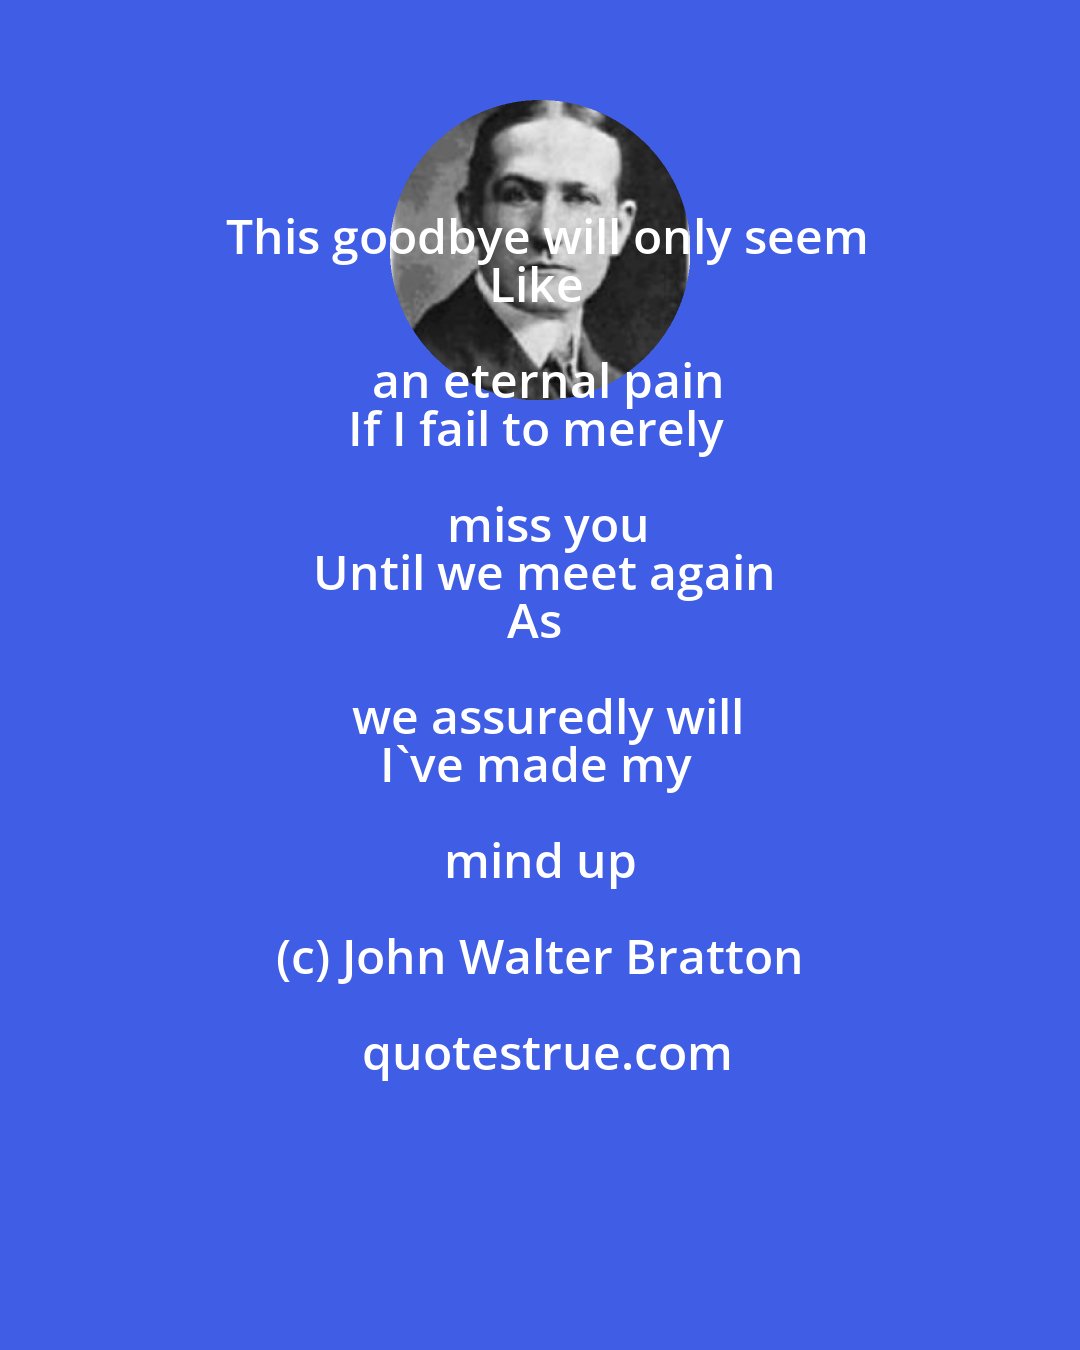 John Walter Bratton: This goodbye will only seem
Like an eternal pain
If I fail to merely miss you
Until we meet again
As we assuredly will
I've made my mind up